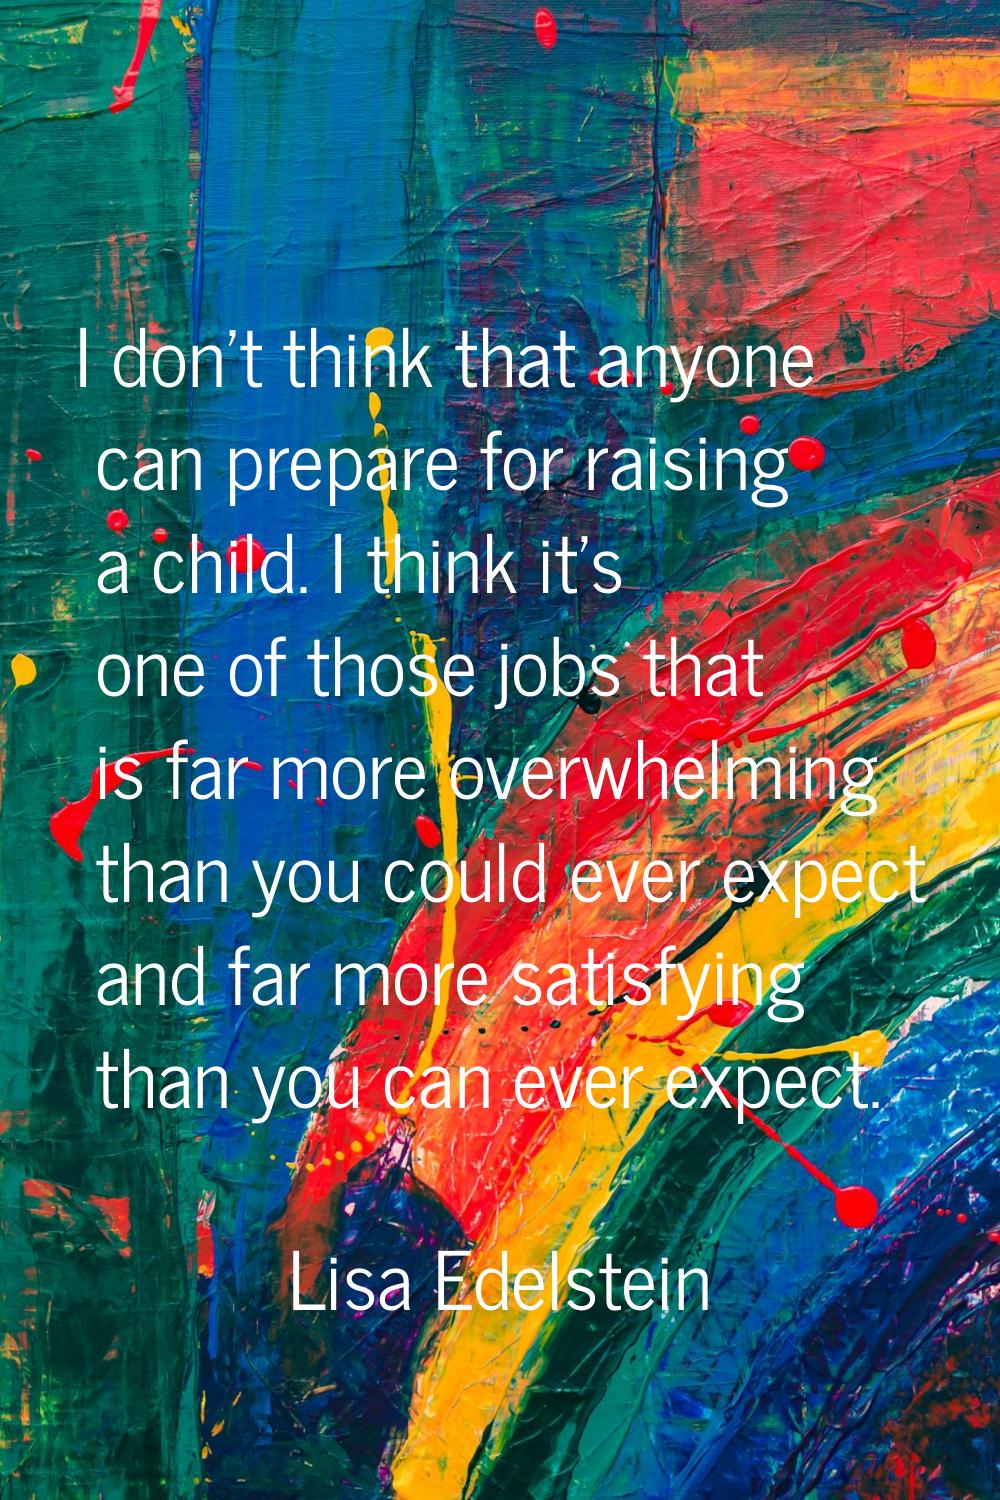 I don't think that anyone can prepare for raising a child. I think it's one of those jobs that is f